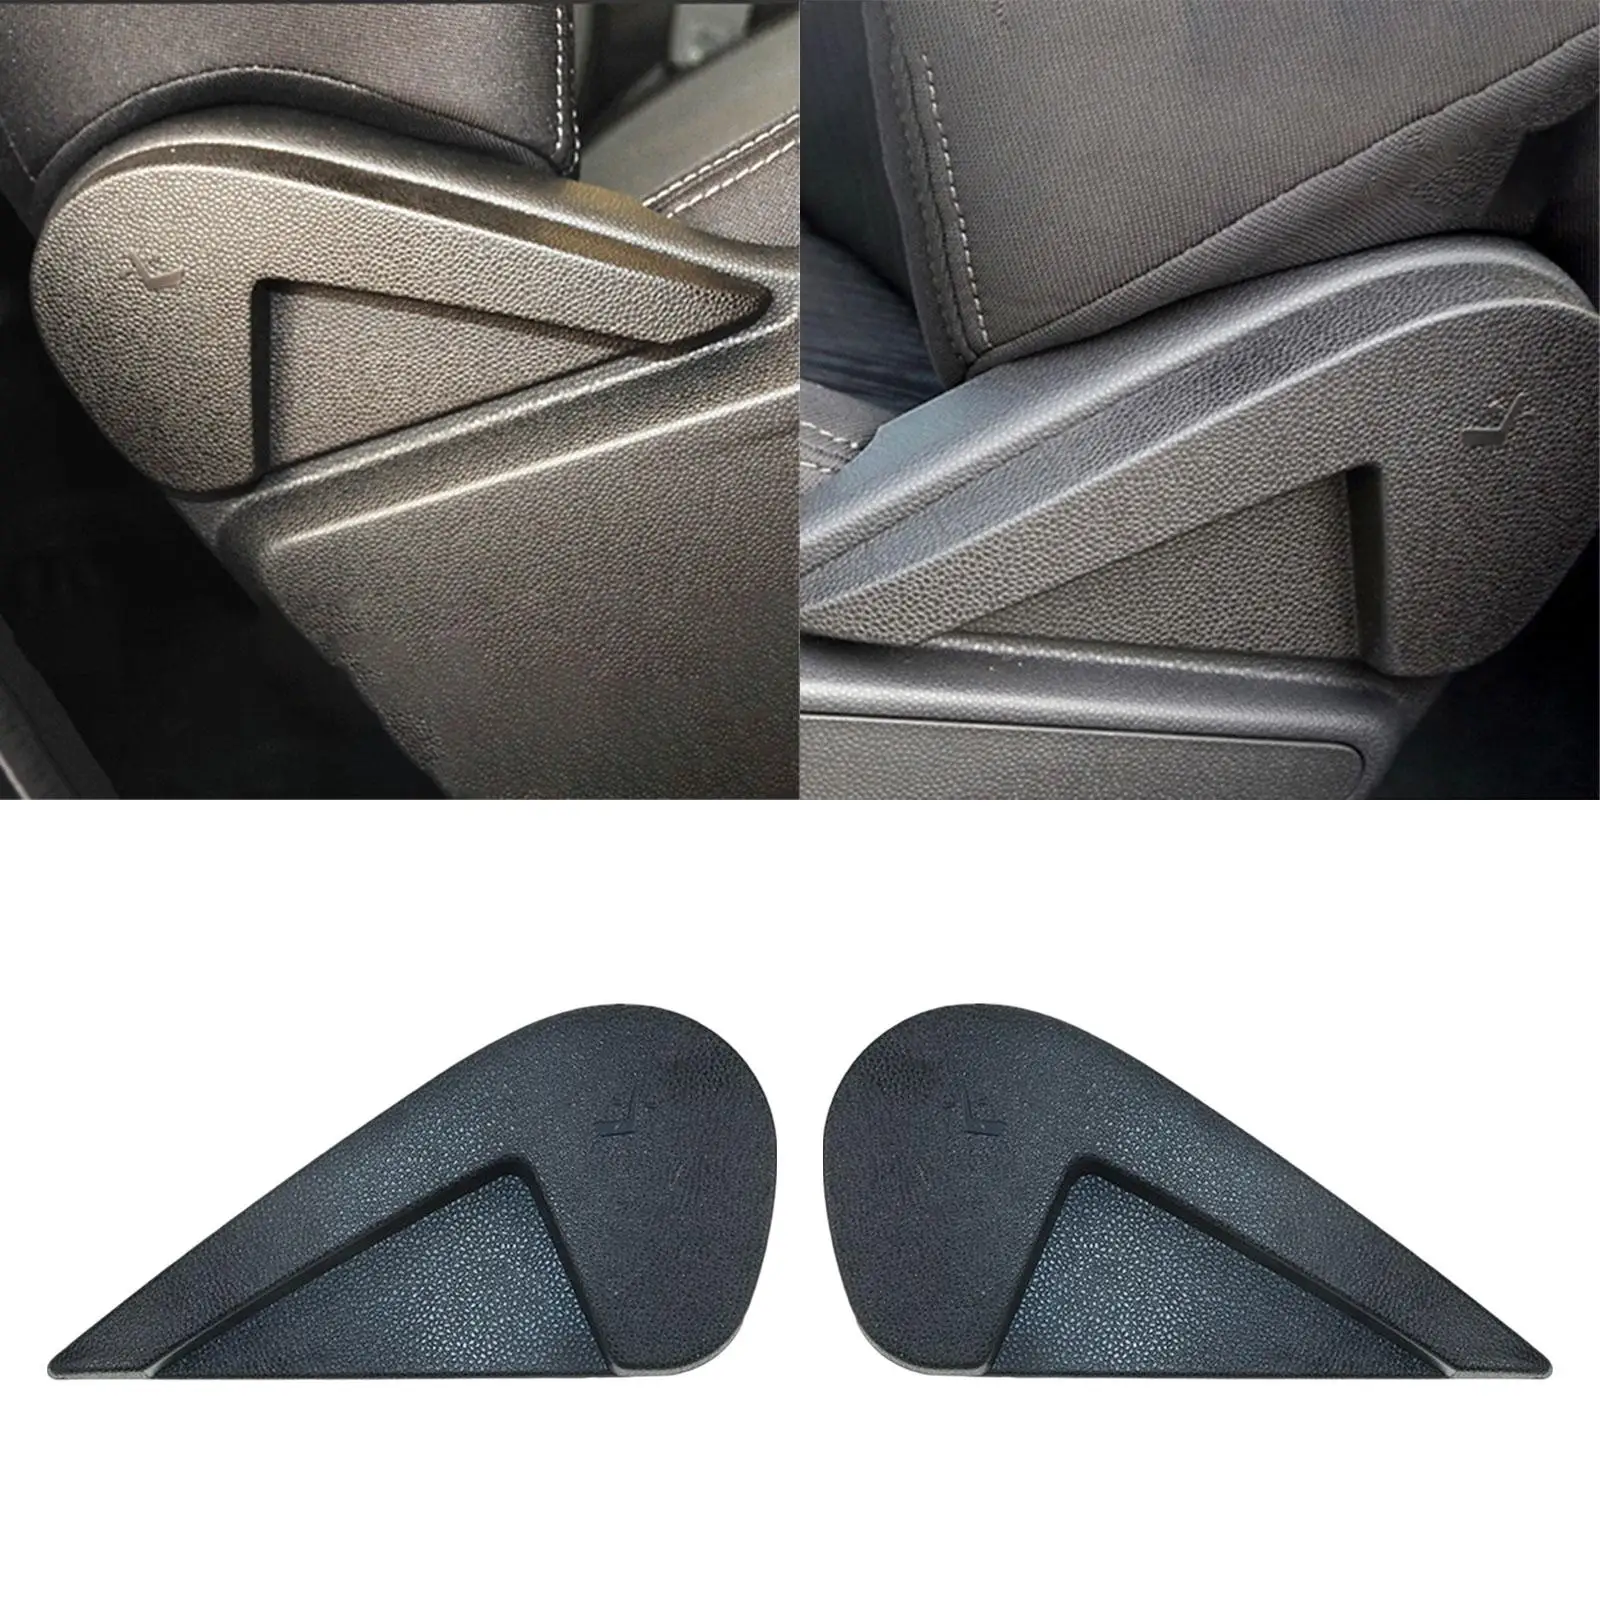 Seat Adjustment Handle High Performance Replaces Automotive Accessories Seat Adjuster Lever for Ford Ecosport 2013-2017